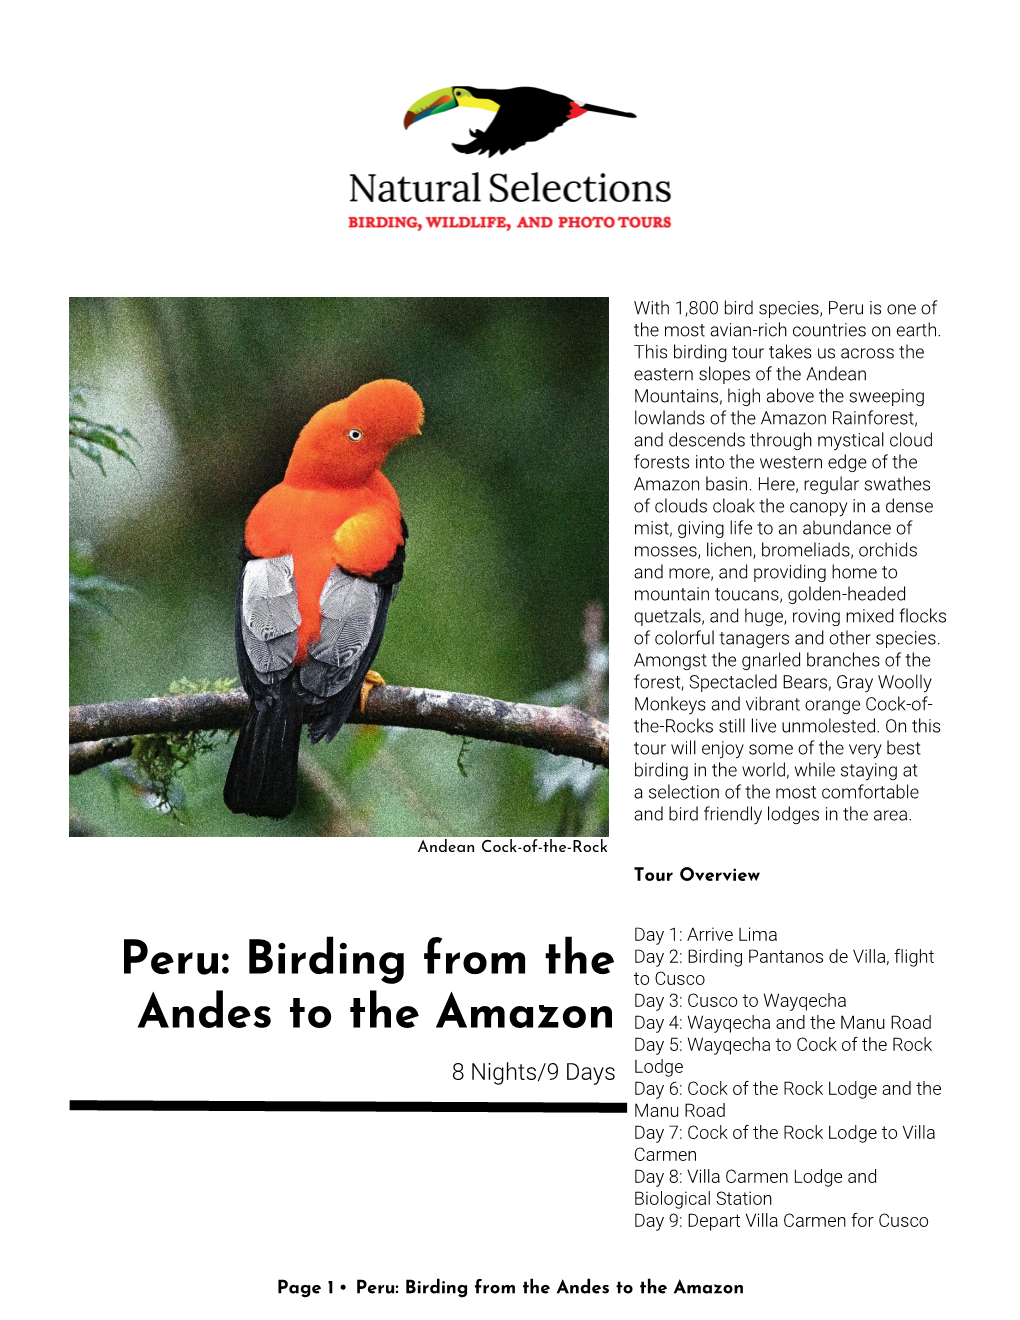 Peru: Birding from the Andes to the Amazon